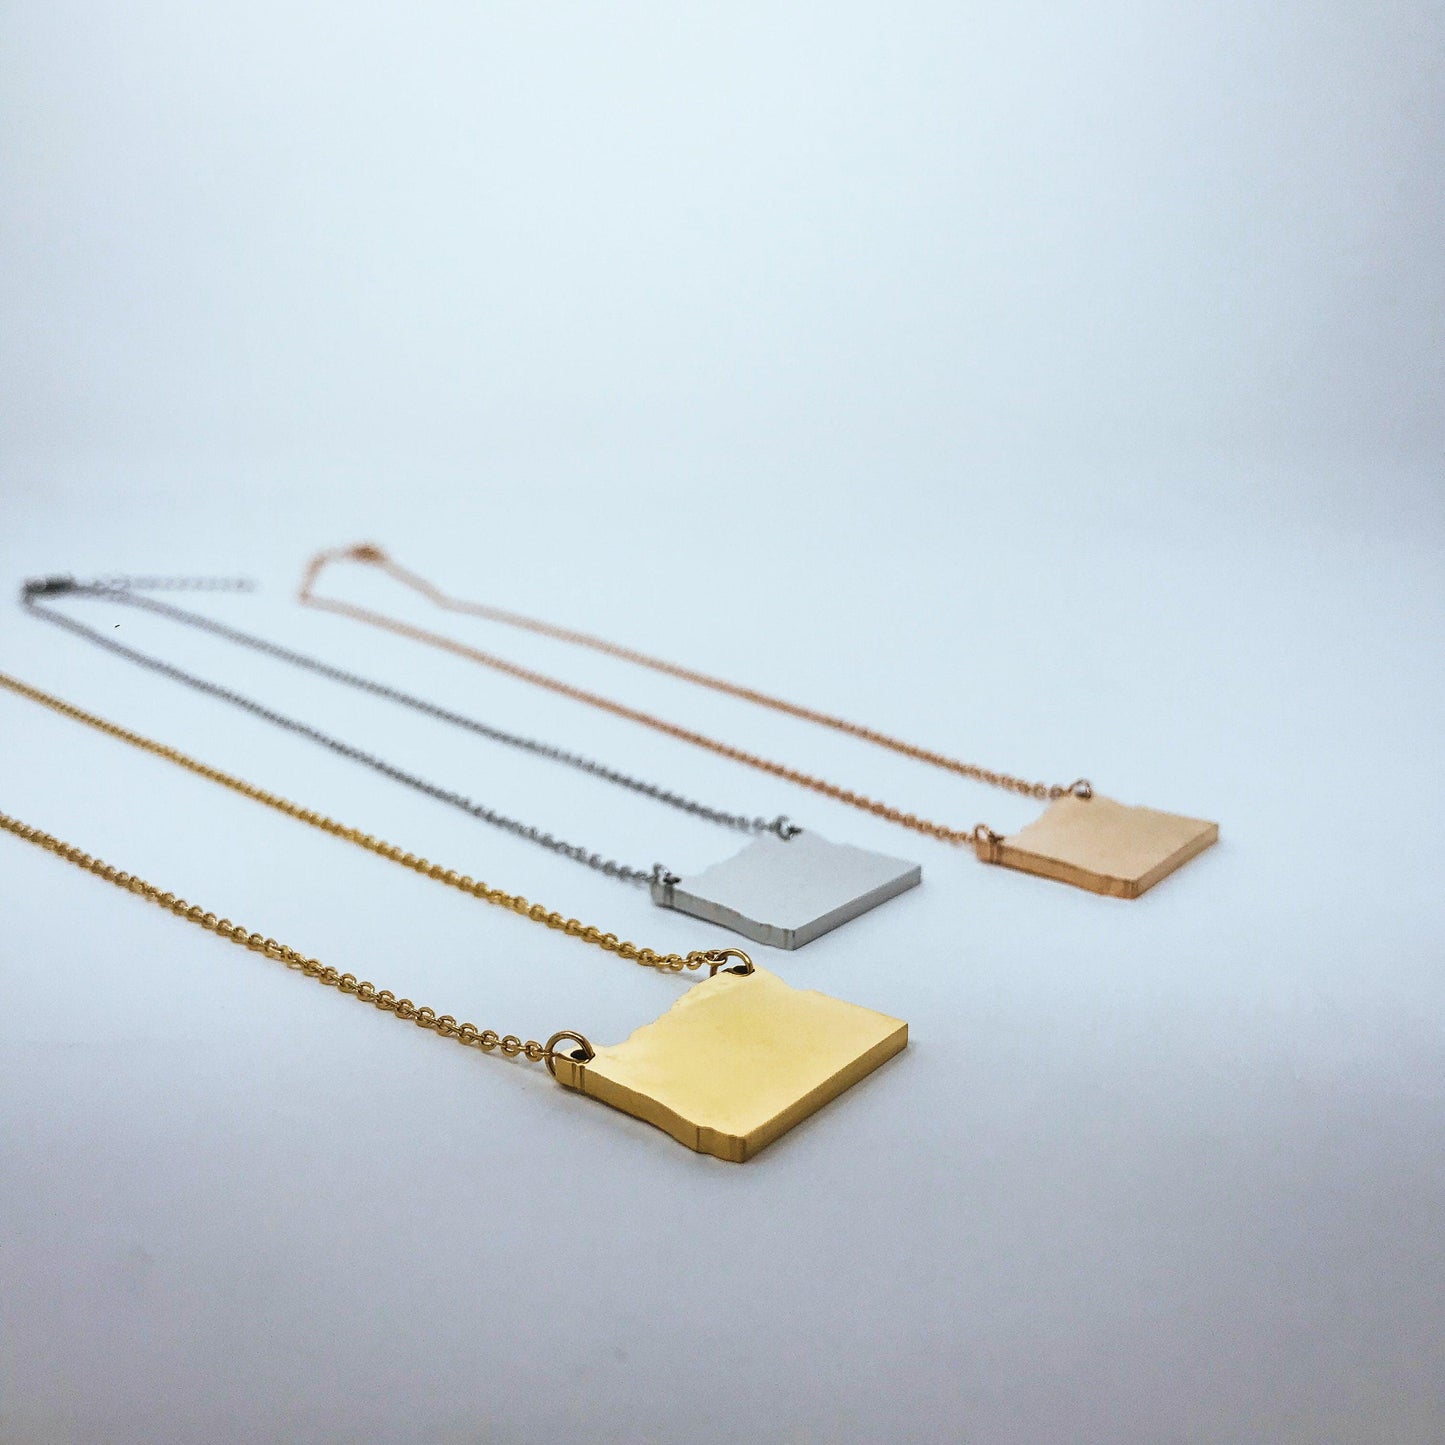 Oregon State Silhouette Necklaces in 3 different colors: Gold, Silver & Rose Gold